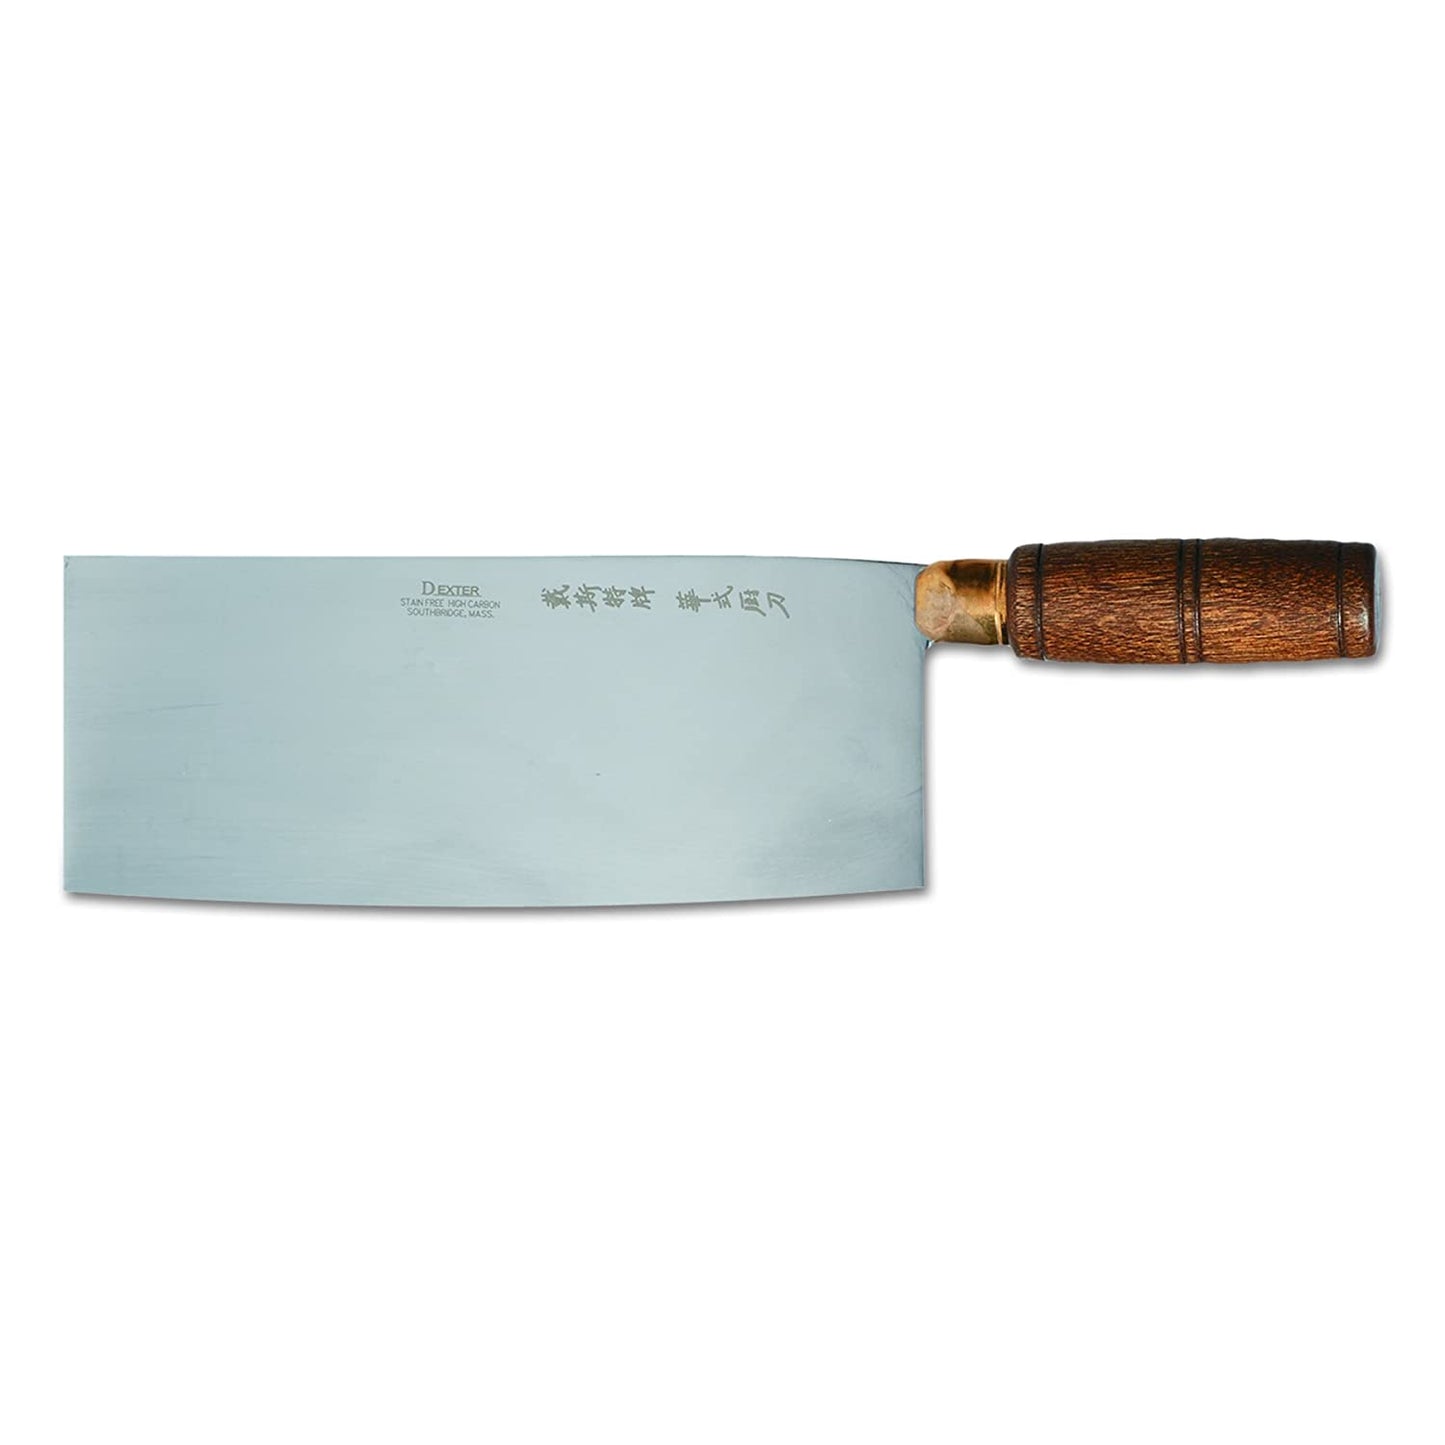 Dexter S5198 8 x 3-14 Chinese Chefs Knife with Wooden Handle